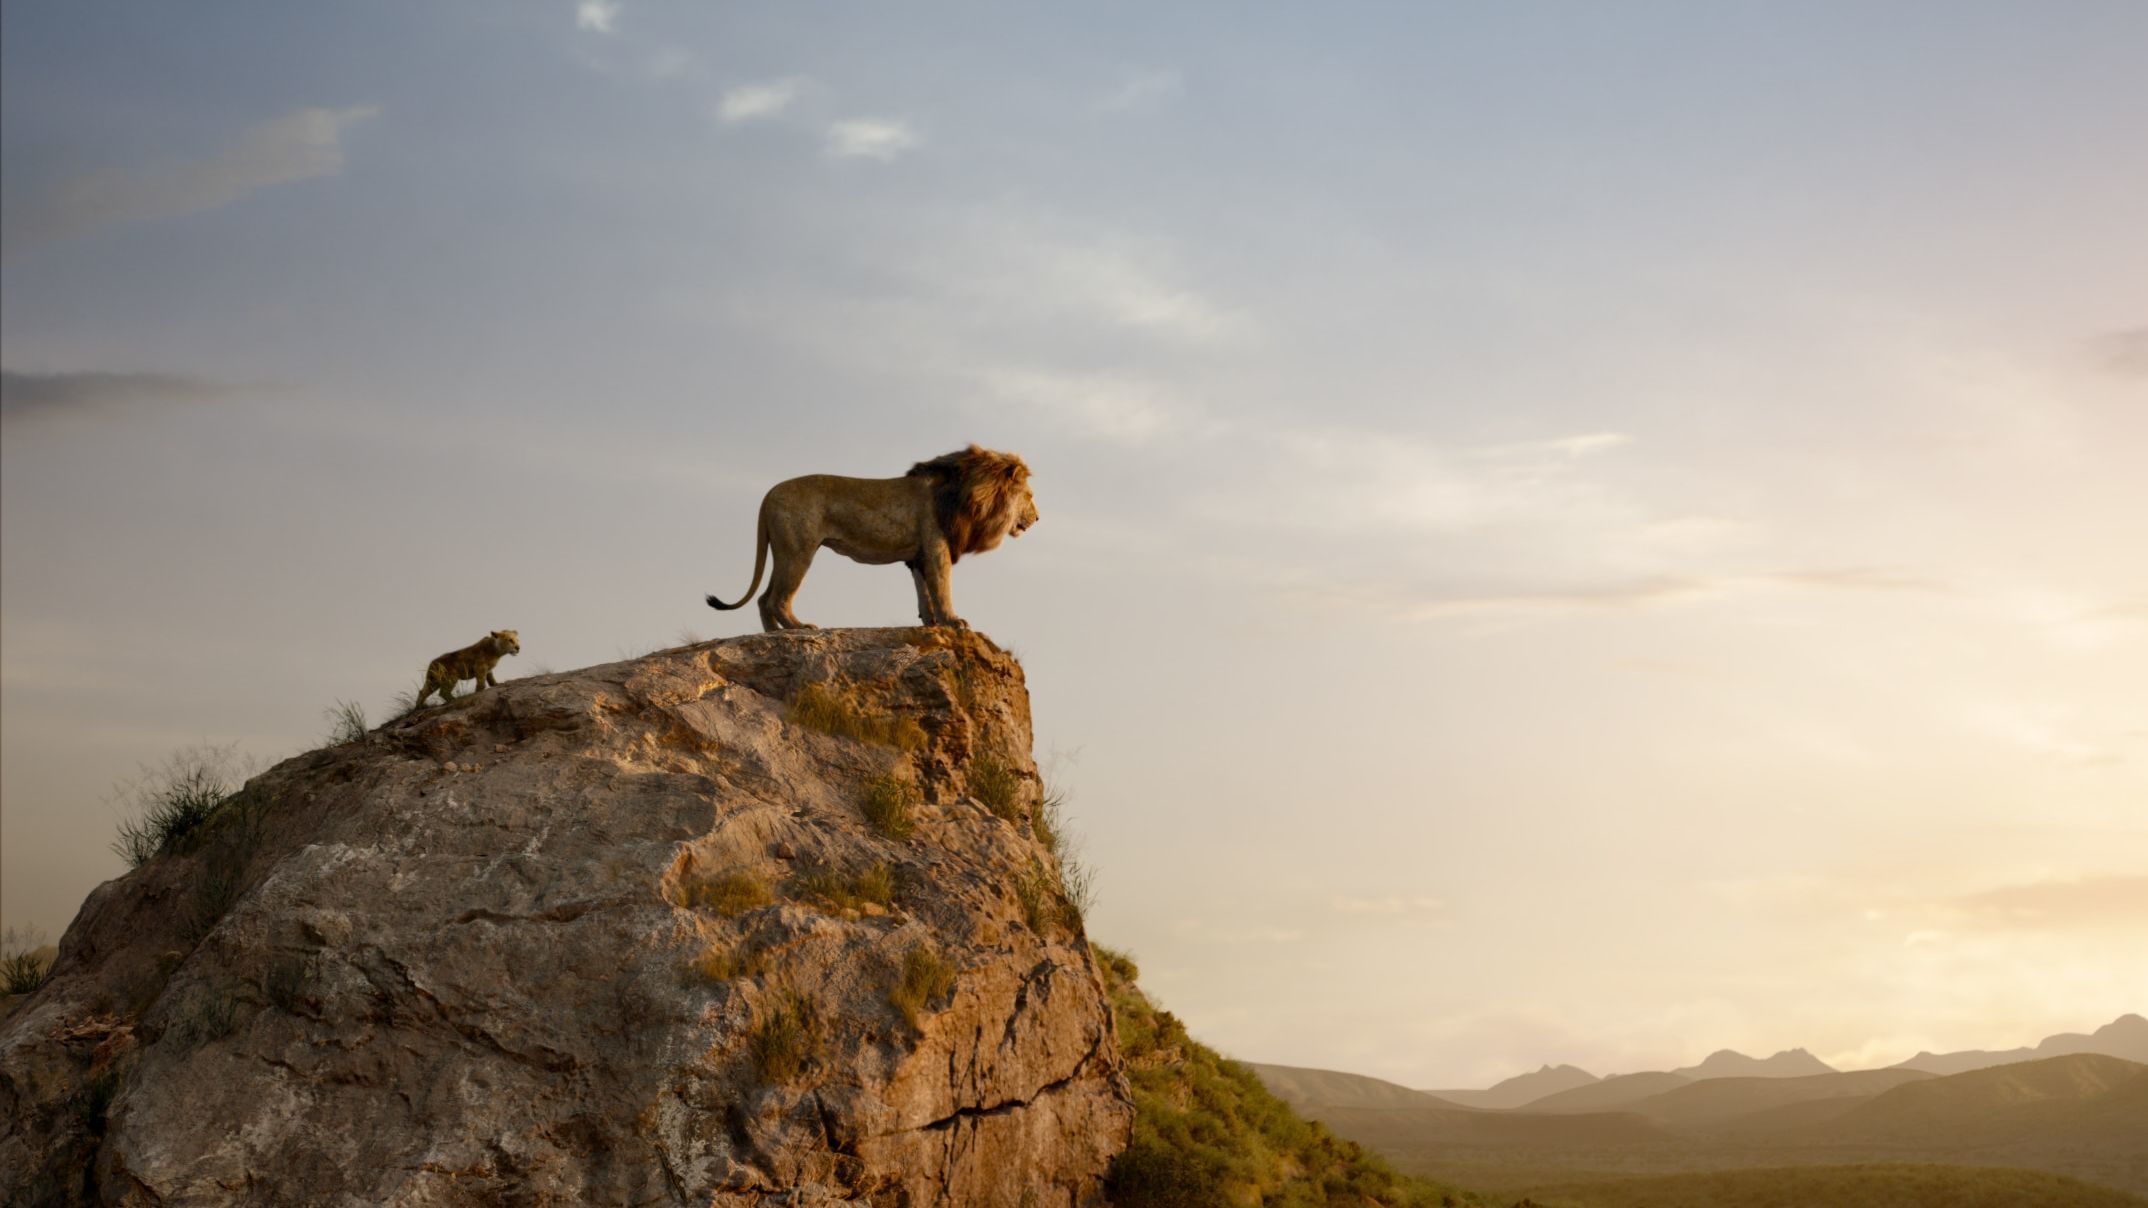 Inside the Making of The Lion King With Director Jon Favreau